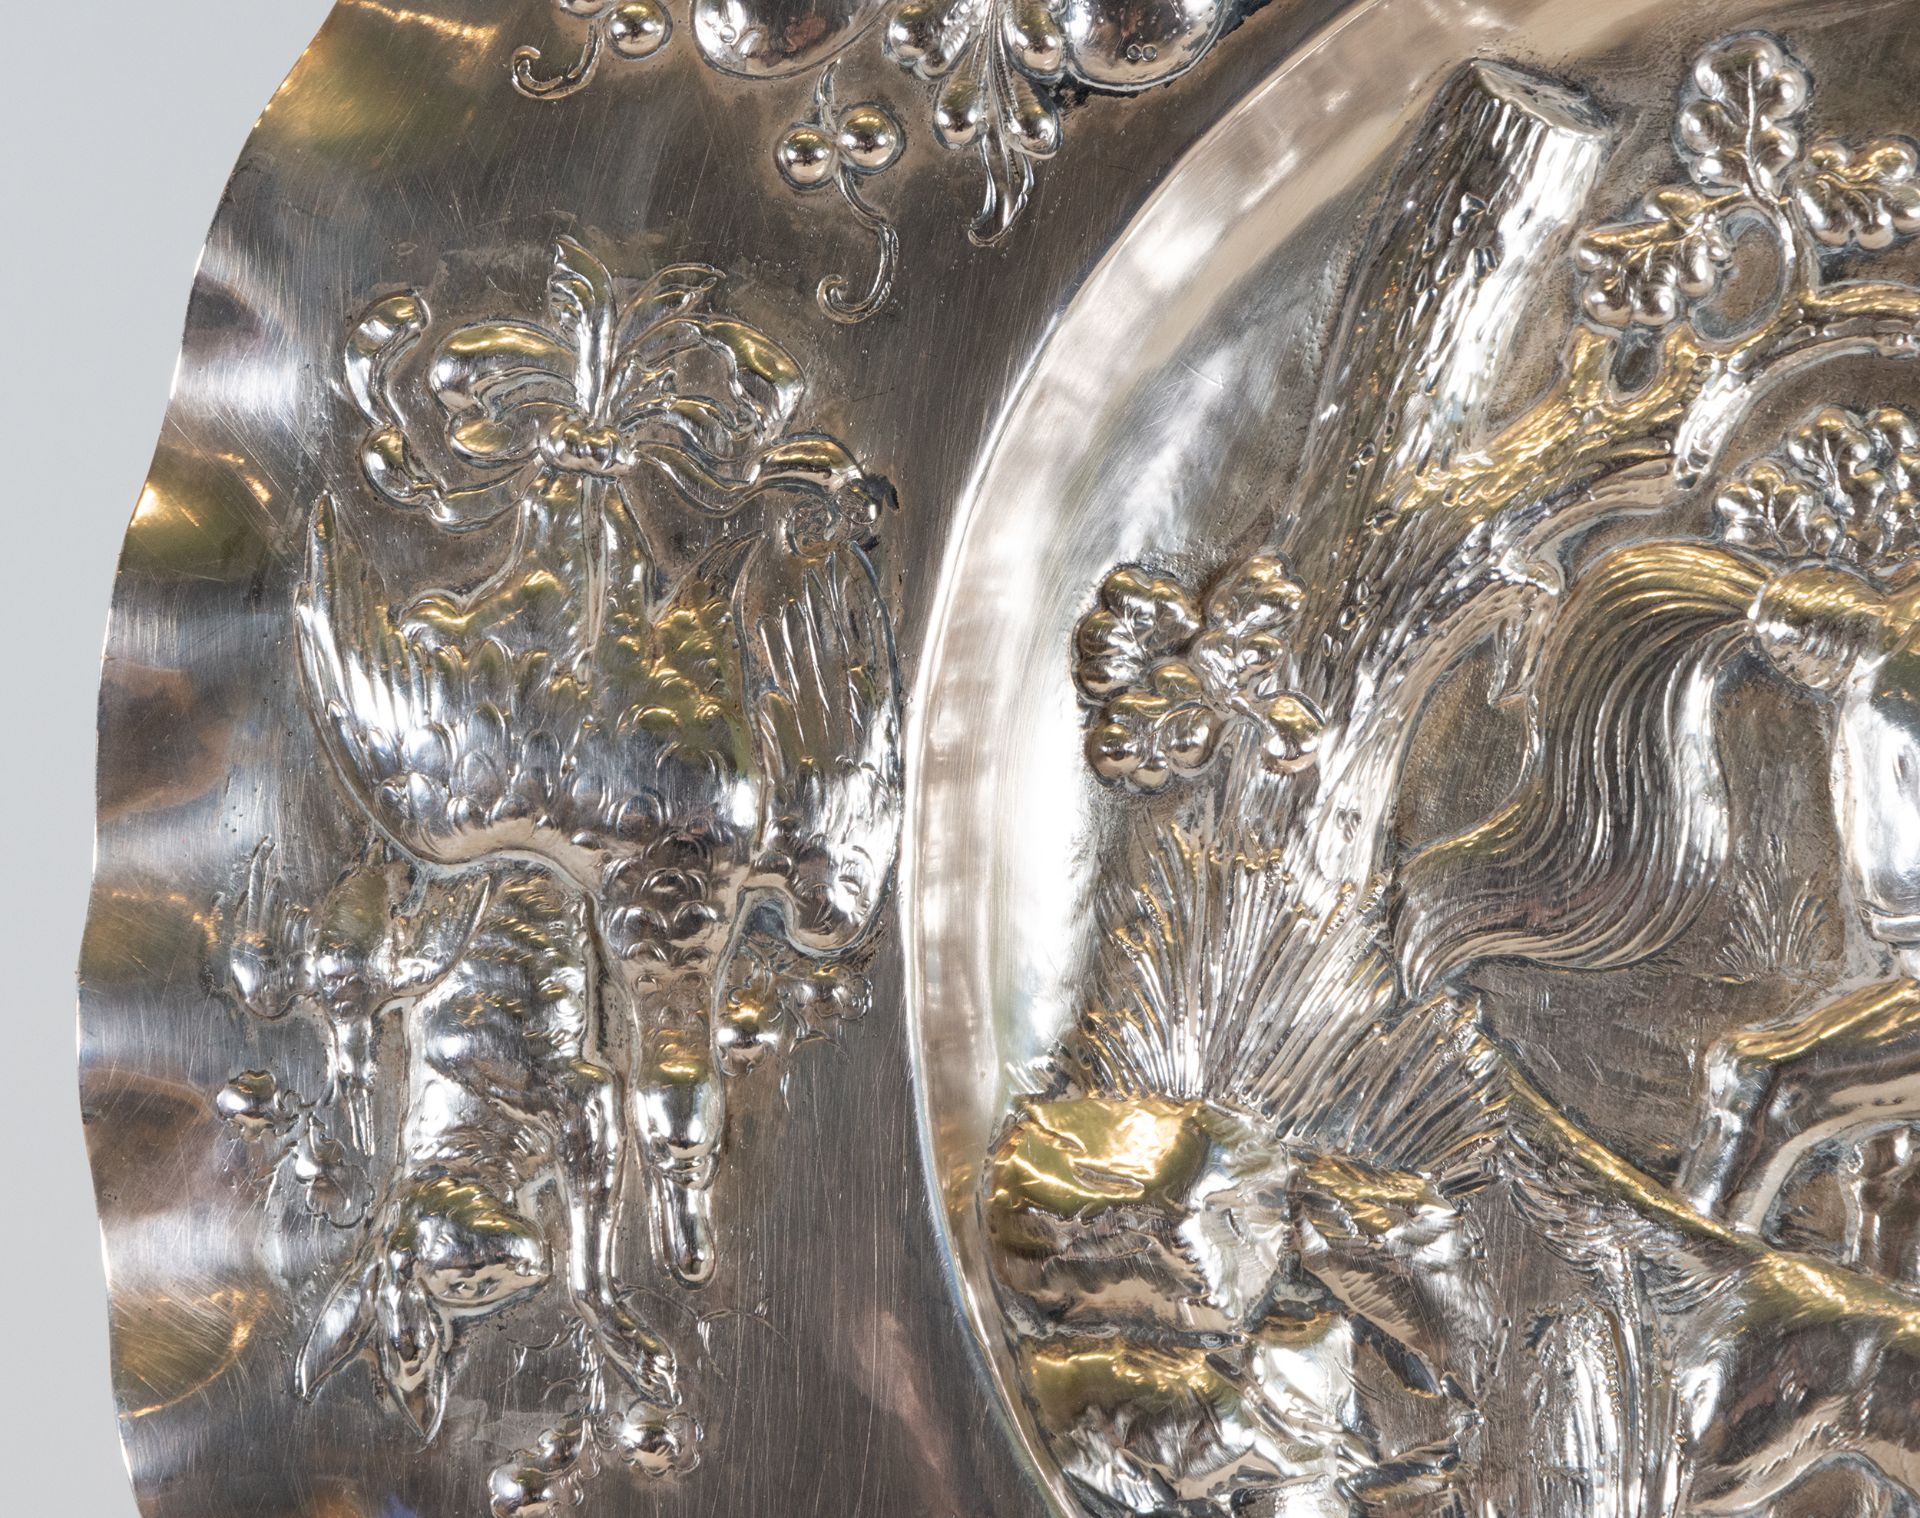 Large Pair of Sterling Silver Trays with Chivalry Motifs, Marks of England, 19th Century - Image 3 of 12